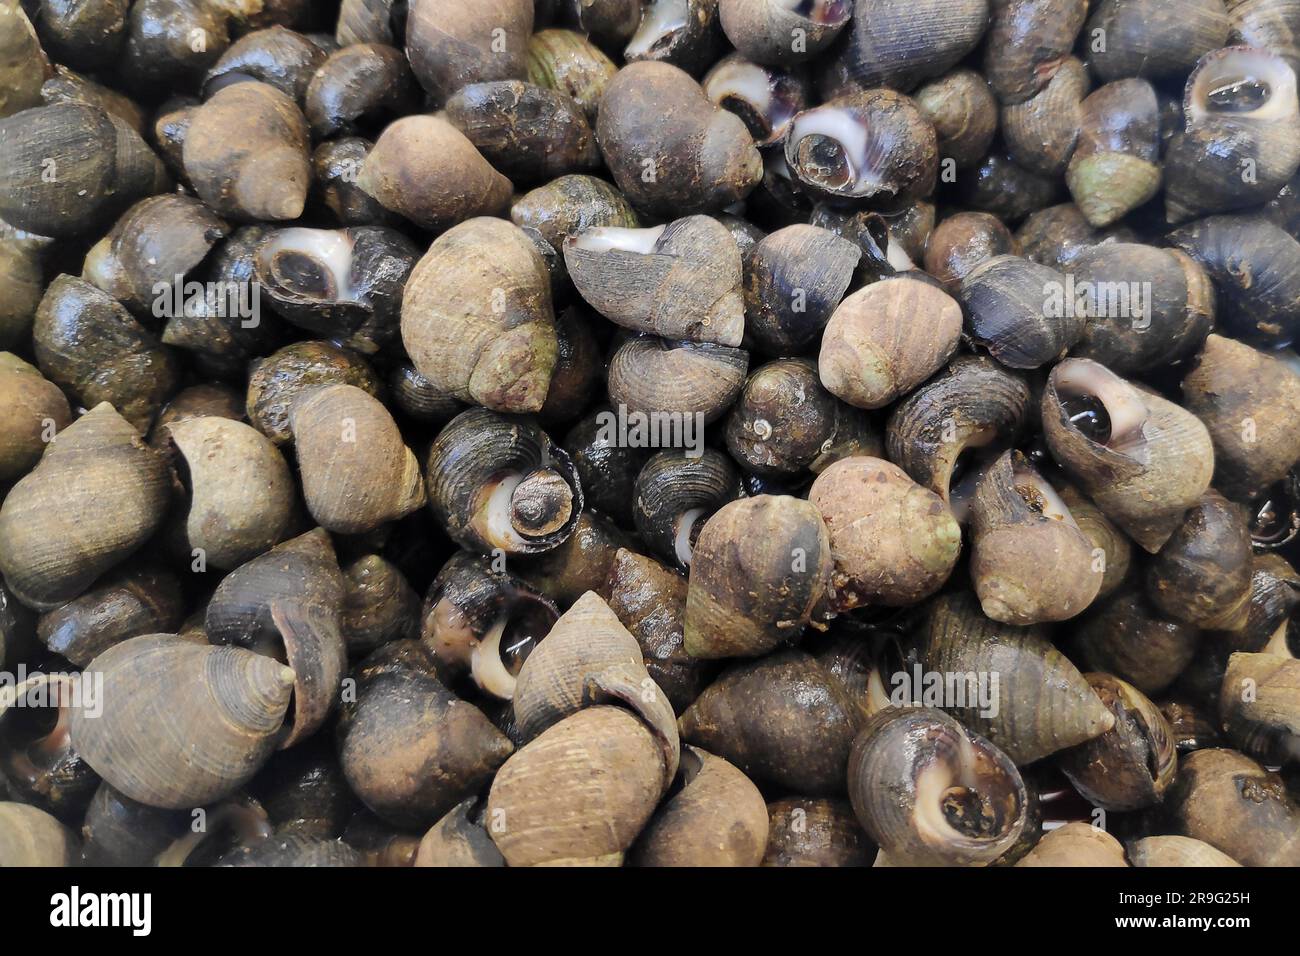 A bunch of periwinkles for sale at a market stall. Stock Photo